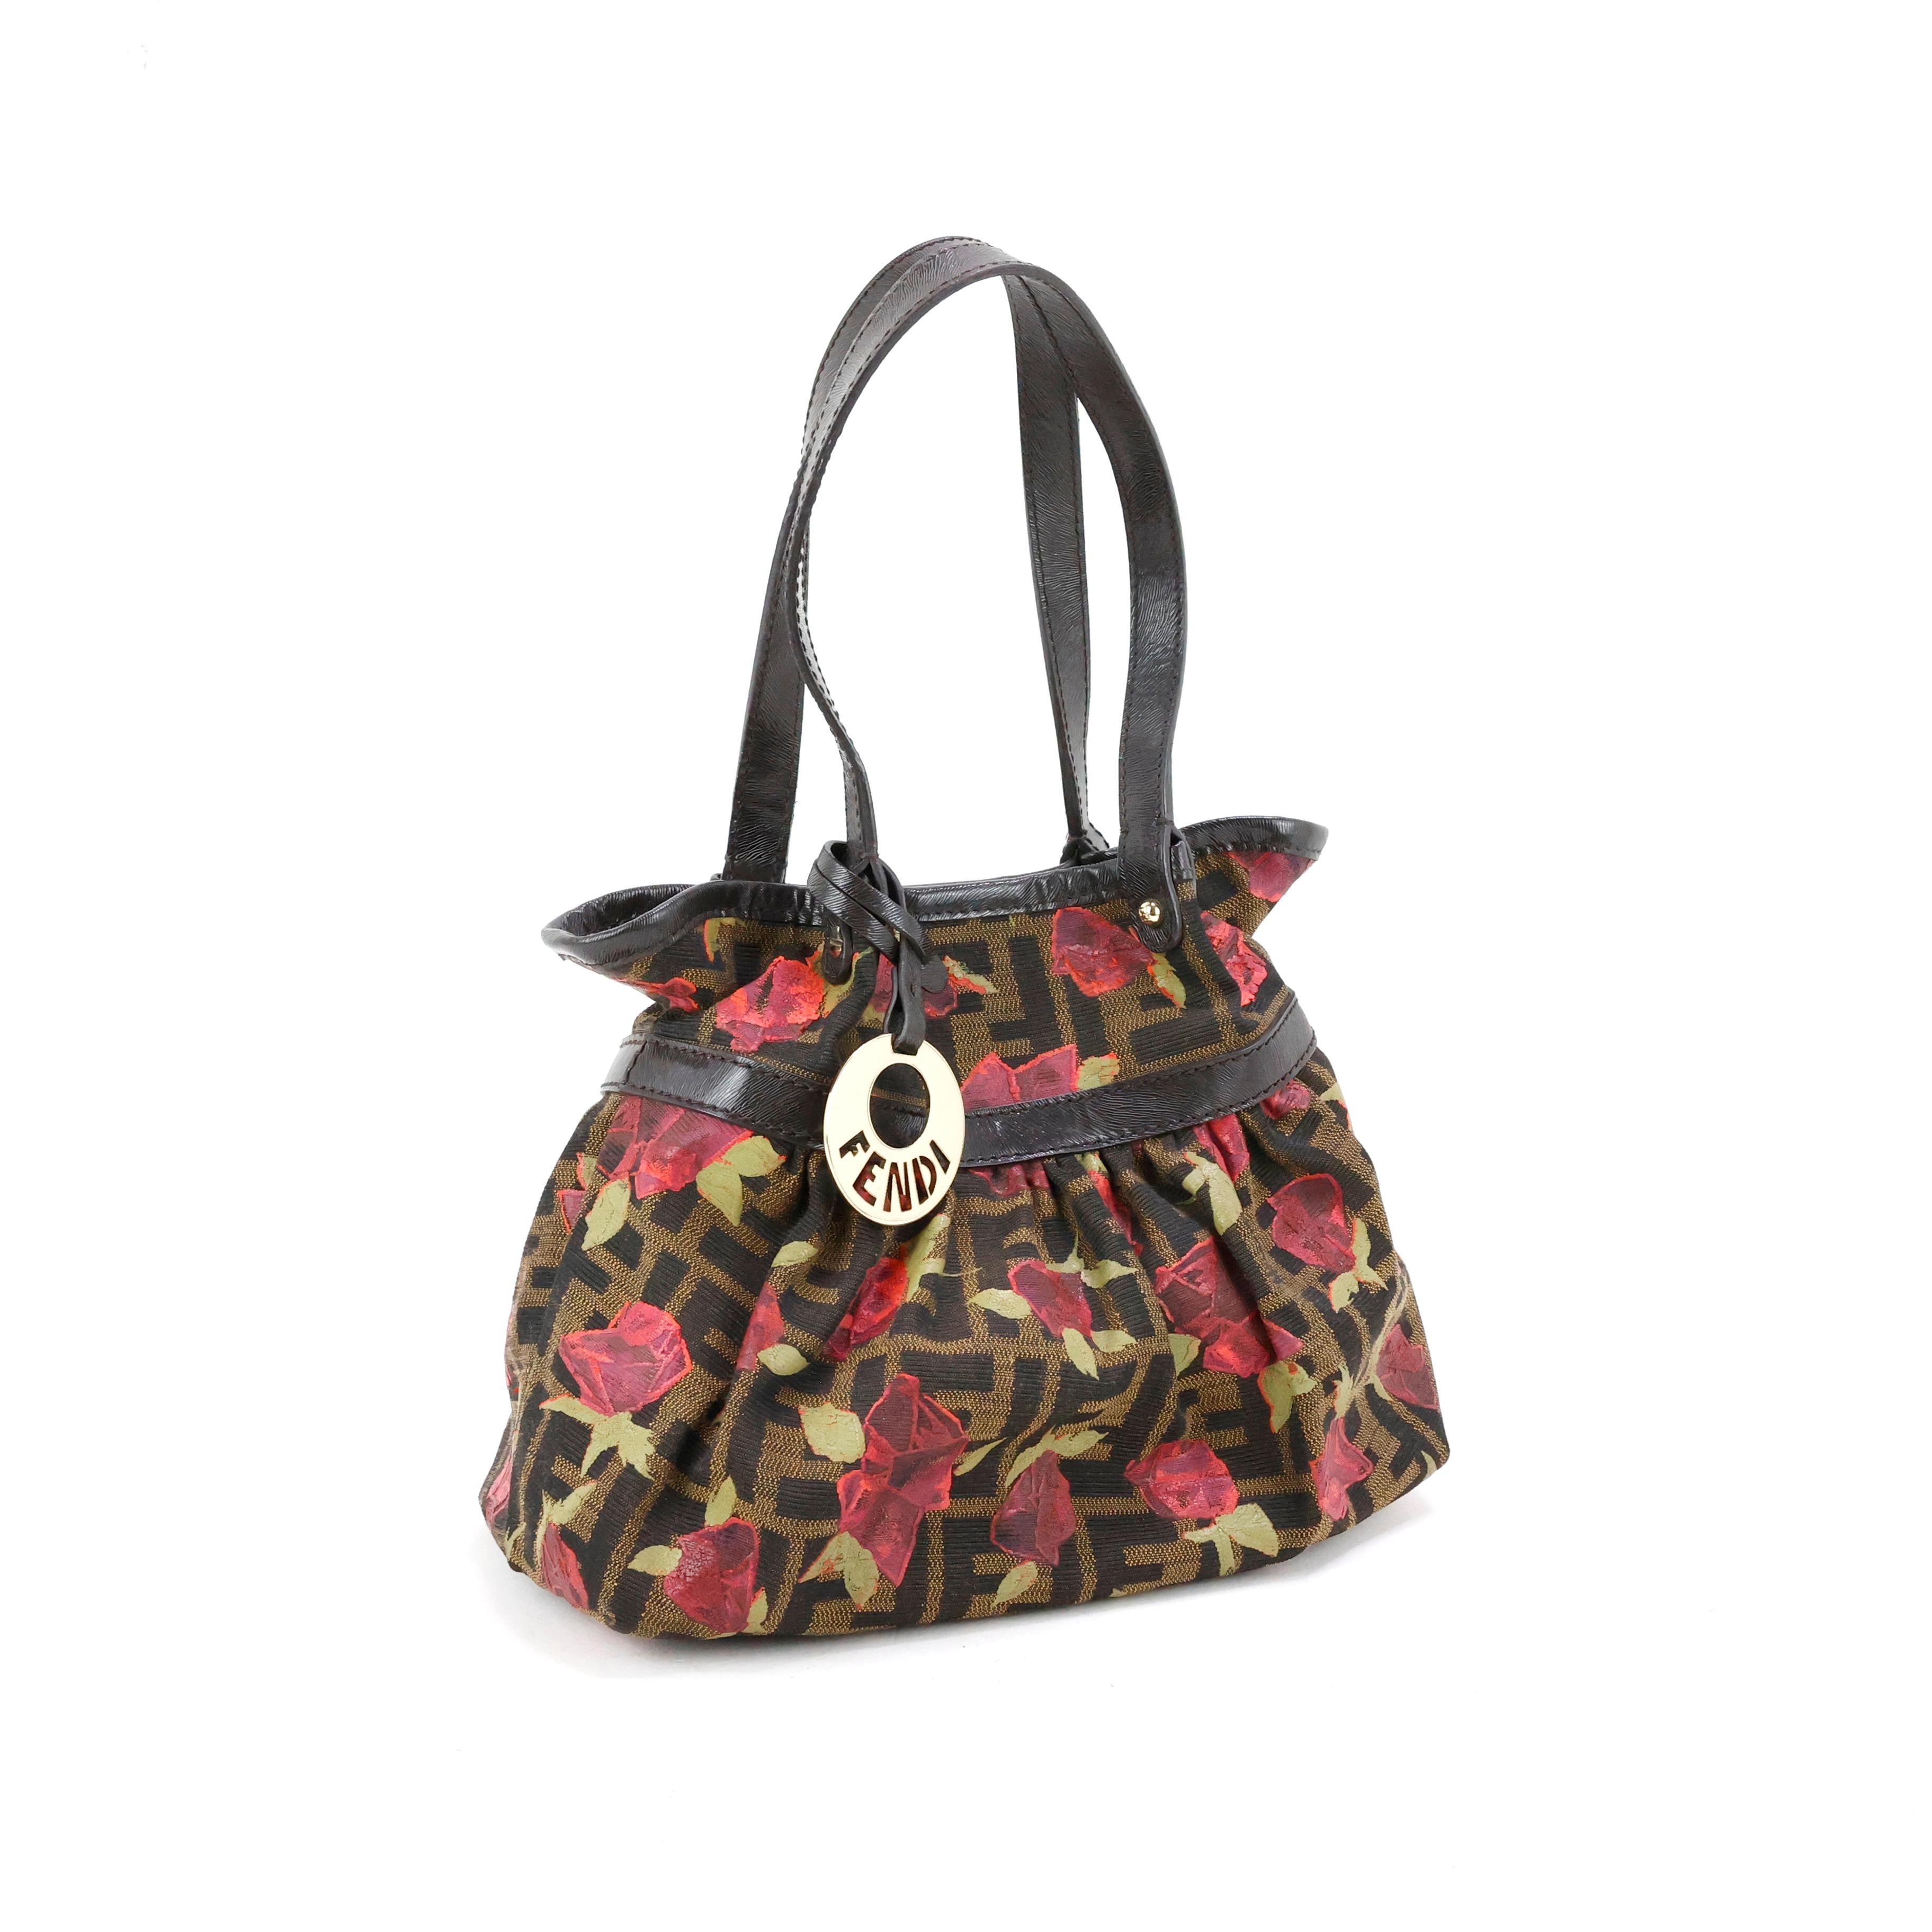 Women's Fendi Bag with hand painted flowers For Sale